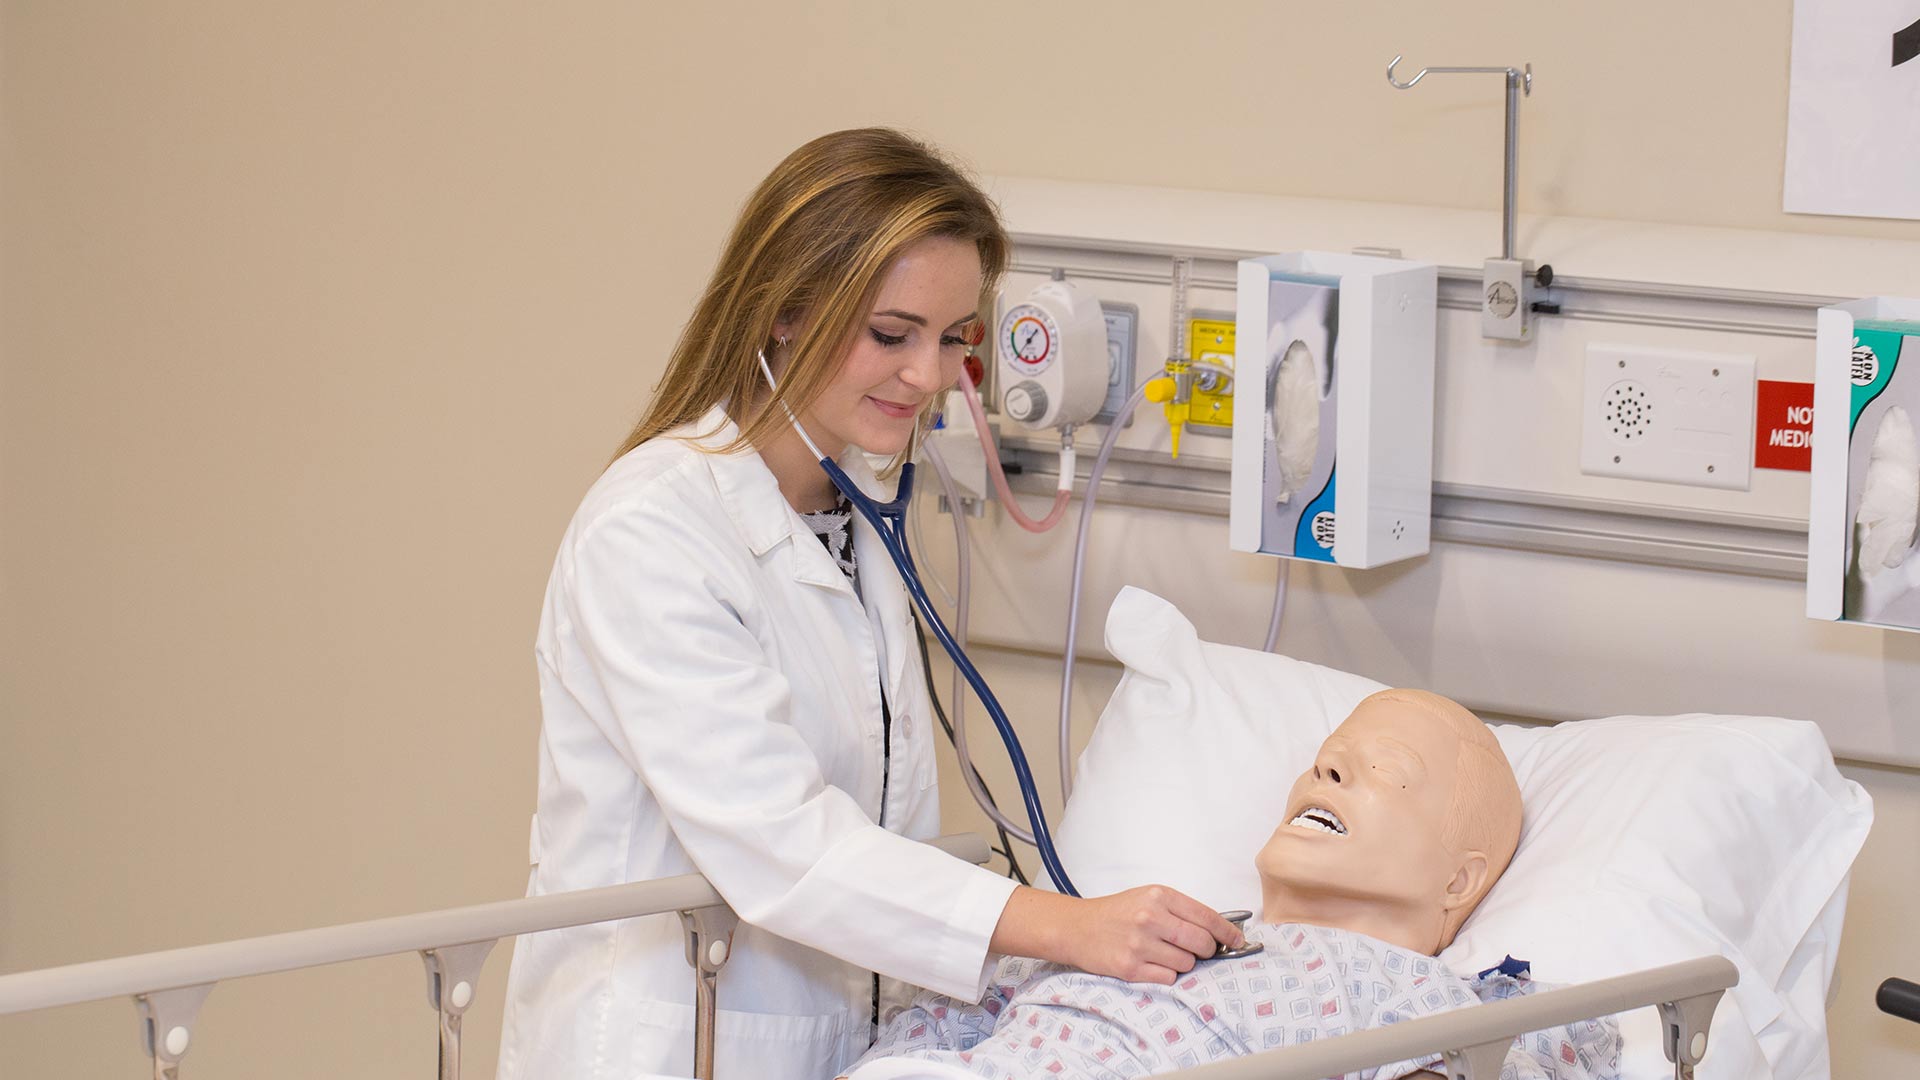 physician assistant using stethoscope